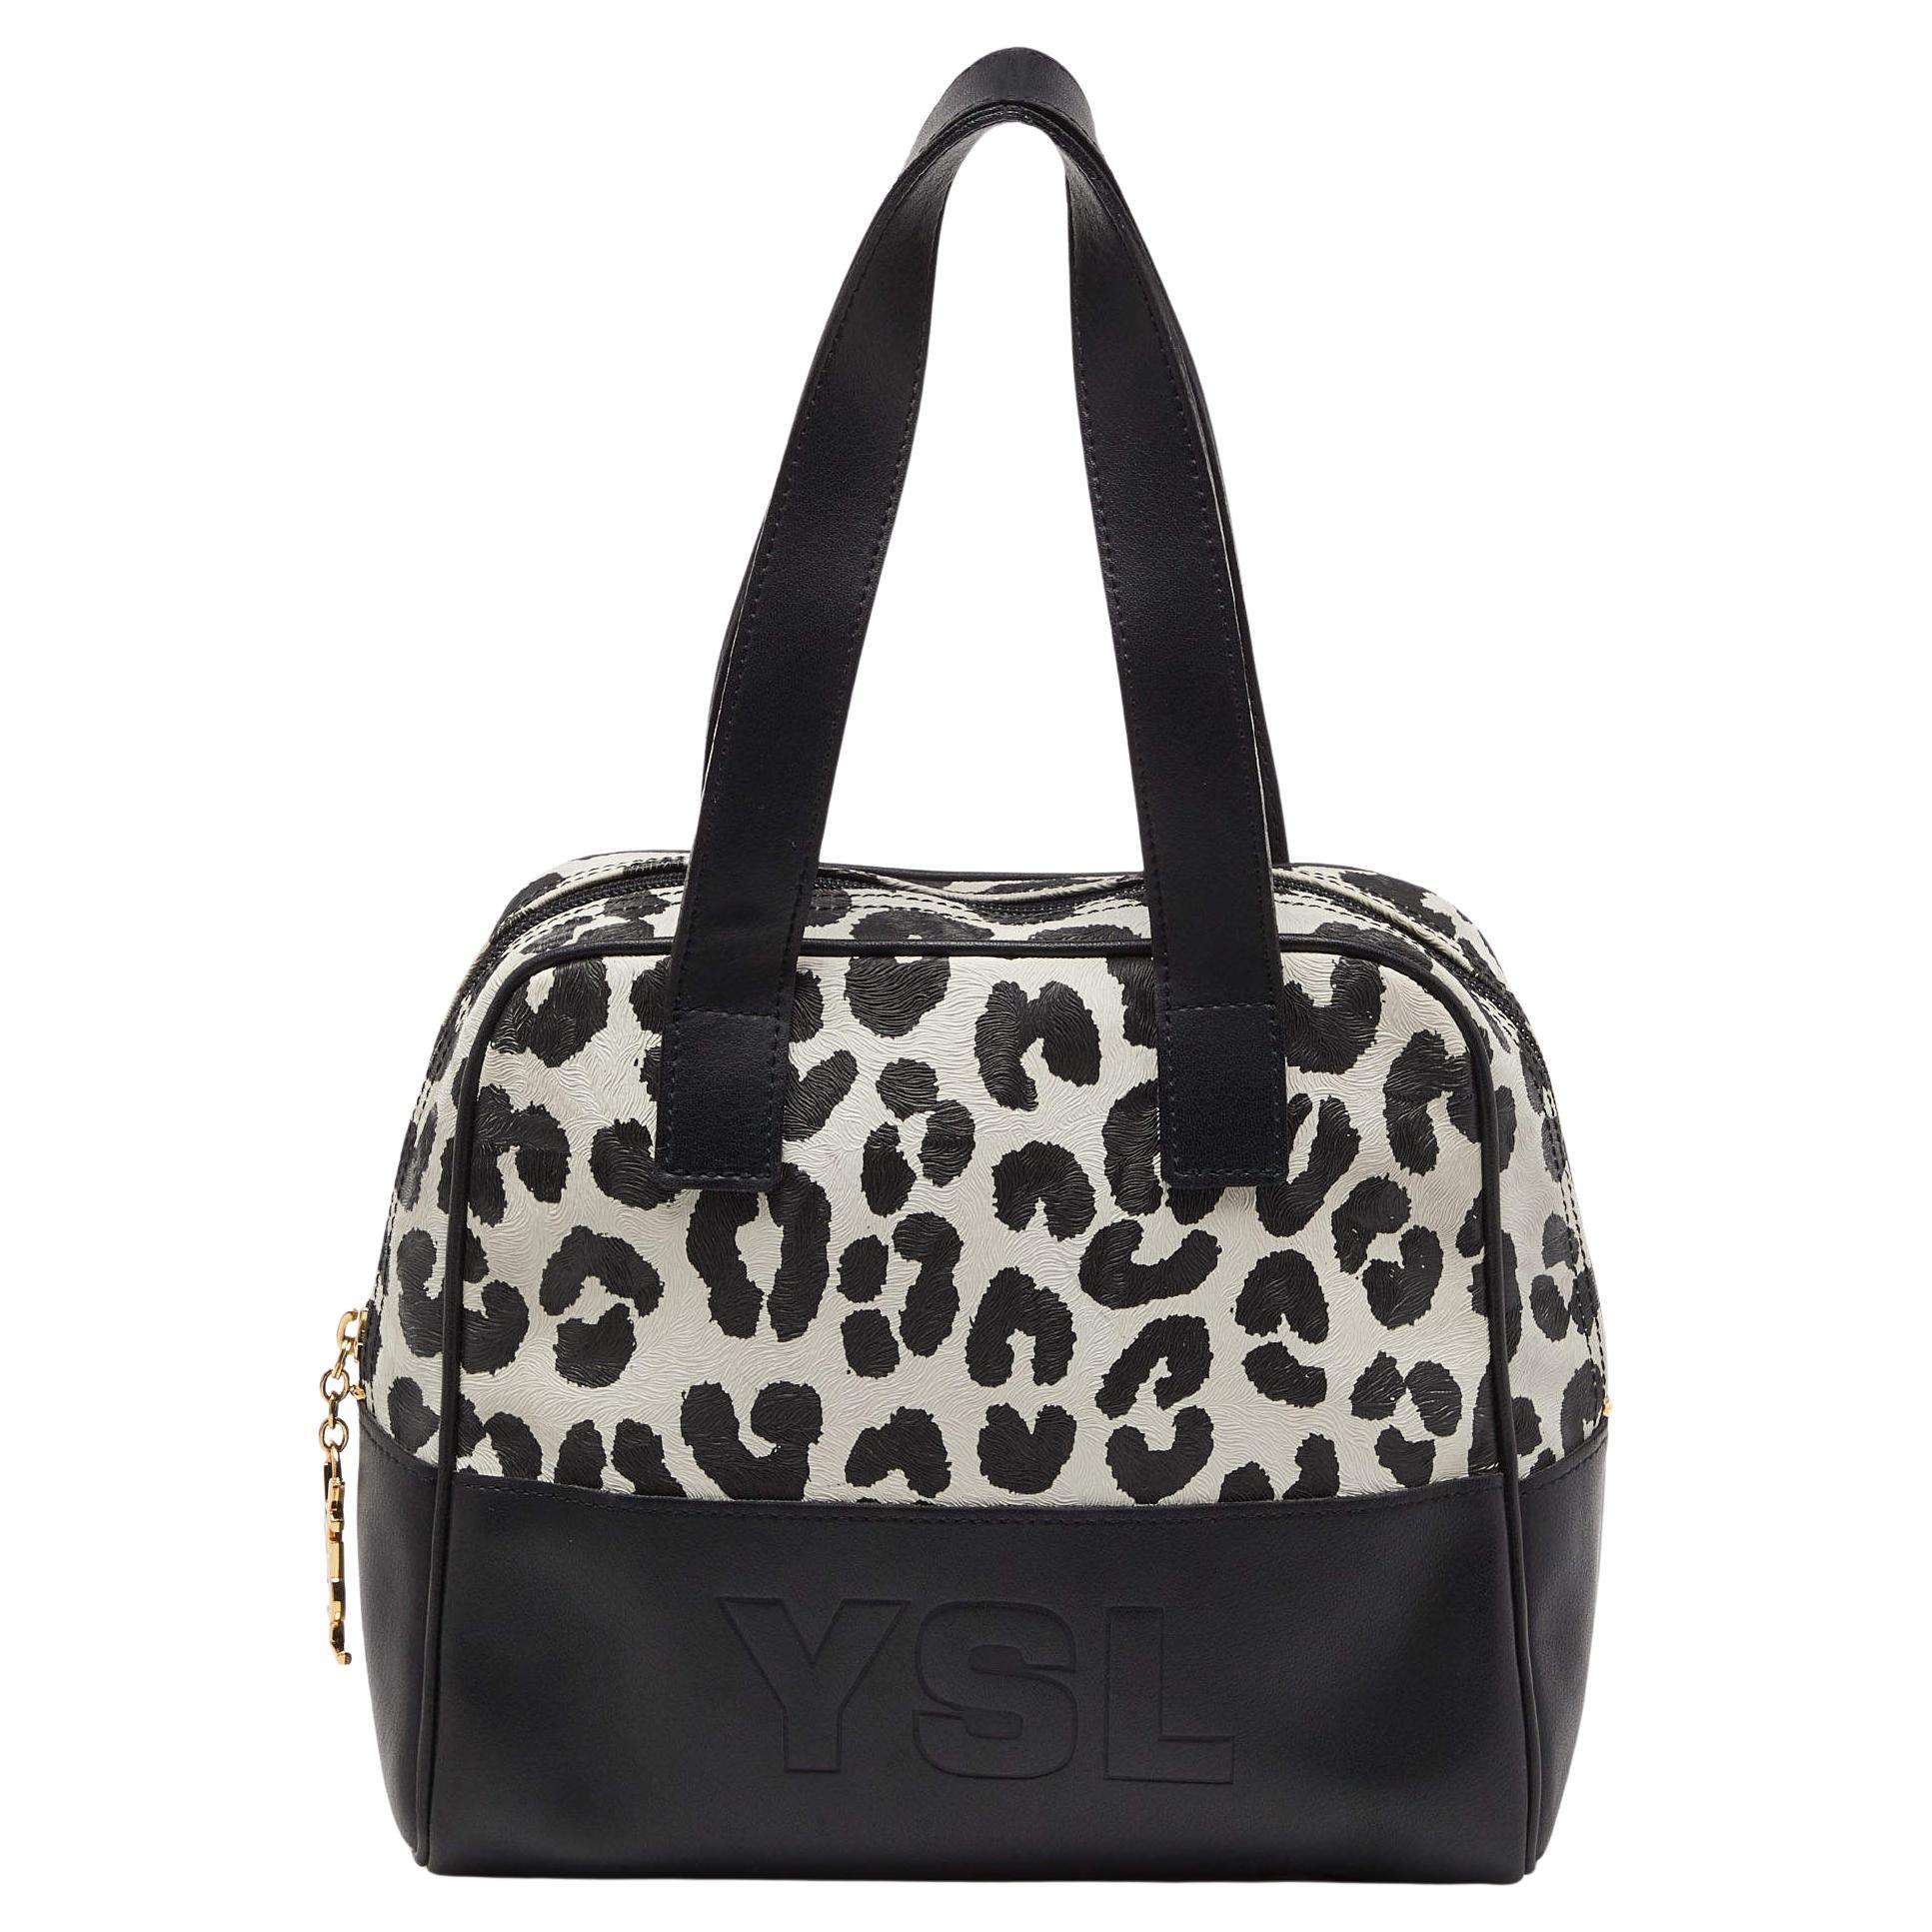 Yves Saint Laurent Black/White Leopard Print Coated Canvas and Leather Satchel For Sale